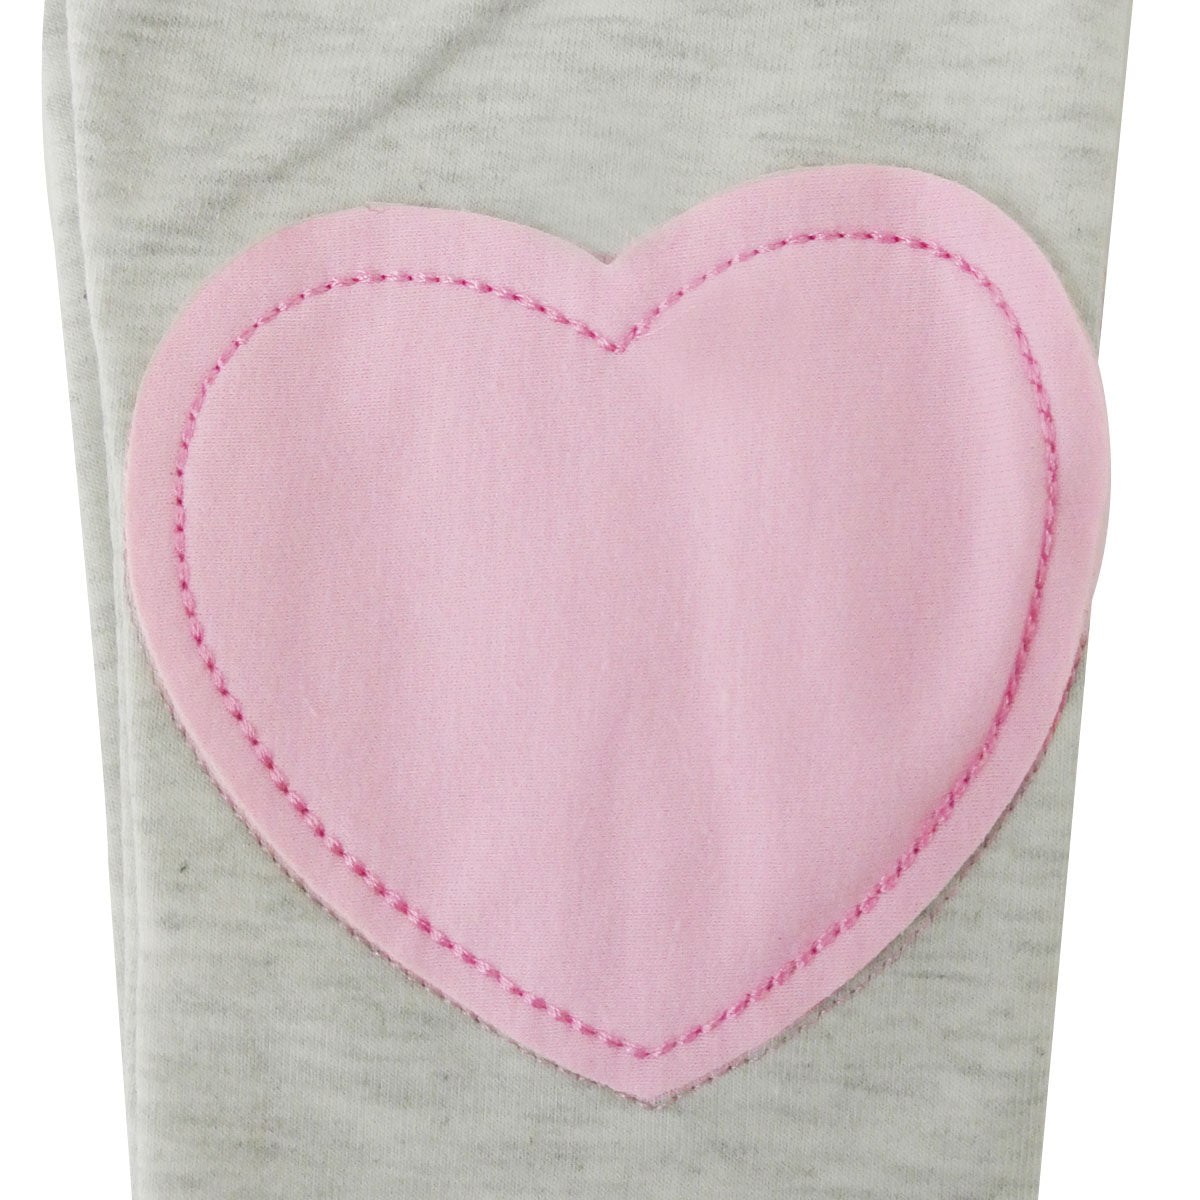 Wrapables Adorable Hearts Toddler Leggings